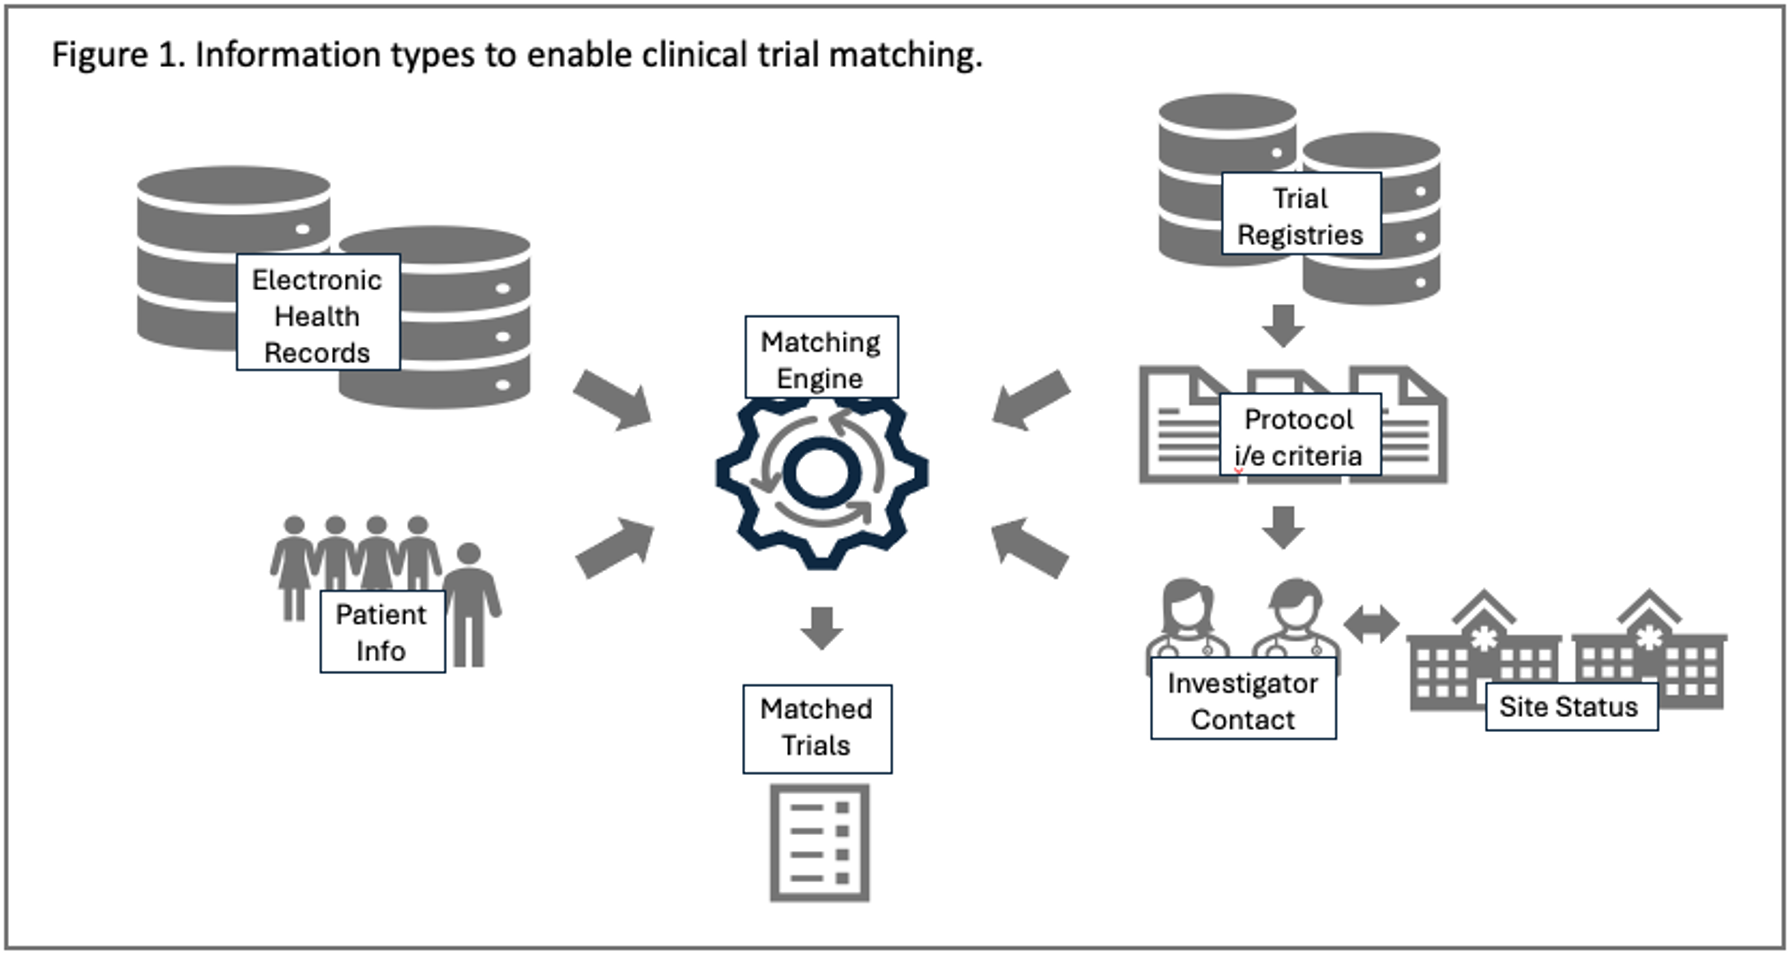 Figure. Information types to enable clinical trial matching.